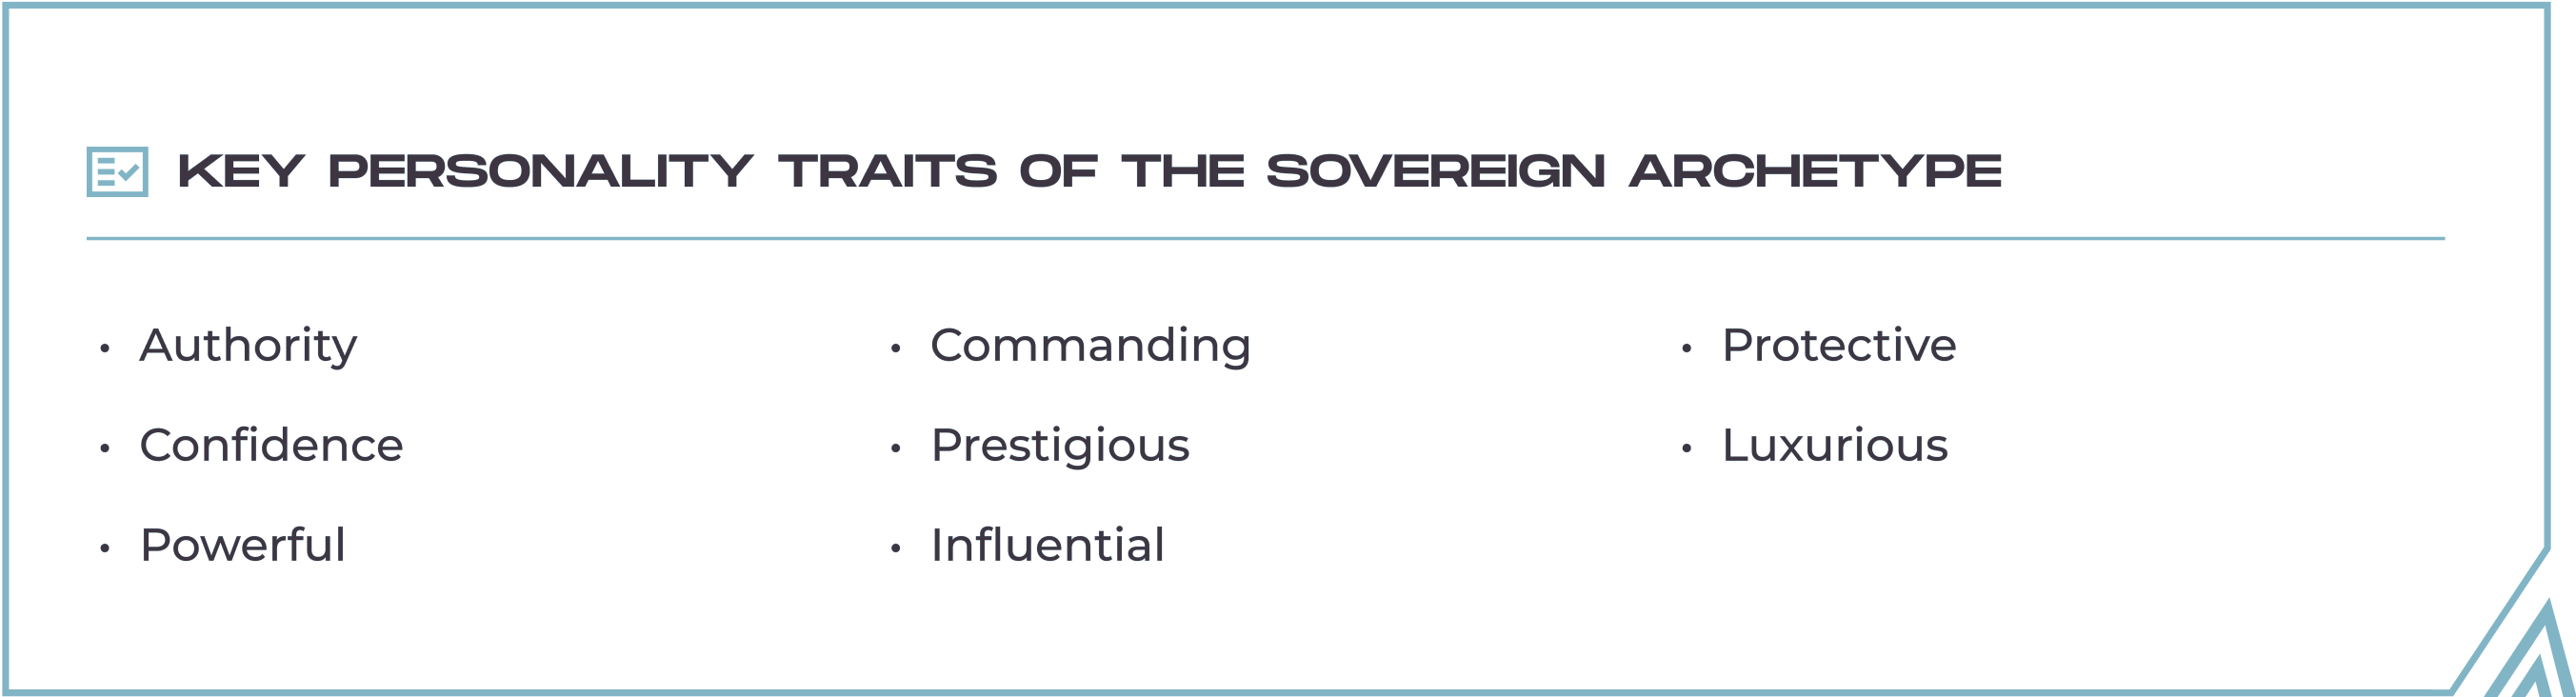 Key Personality of Sovereign Brand Archetype